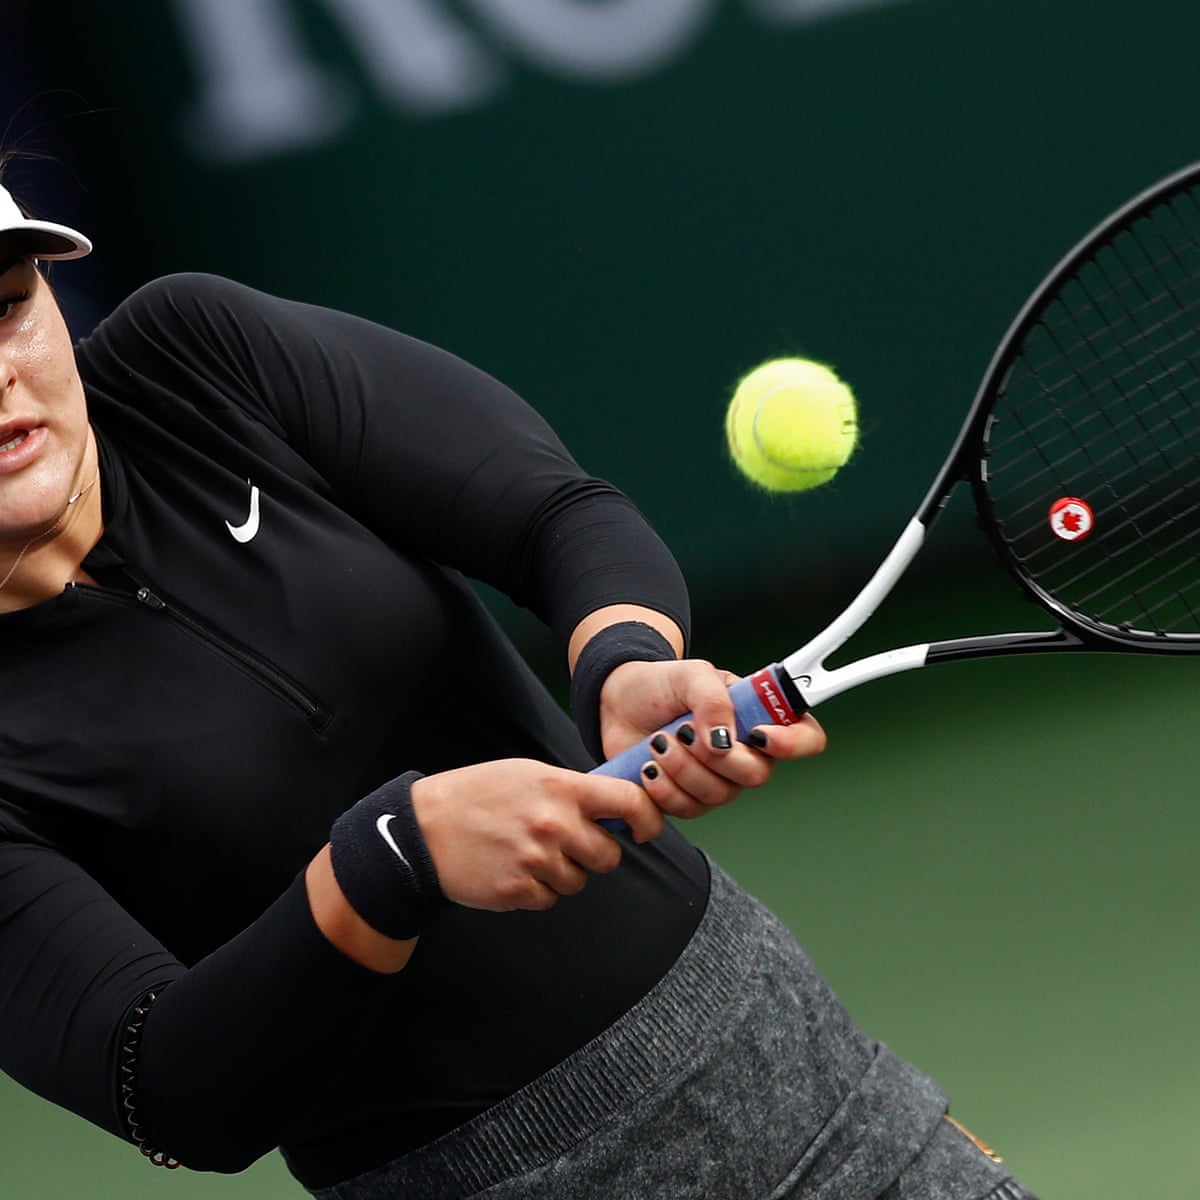 Tennis's attention should be on Andreescu's exploits, not boardroom coups | Tennis | The Guardian